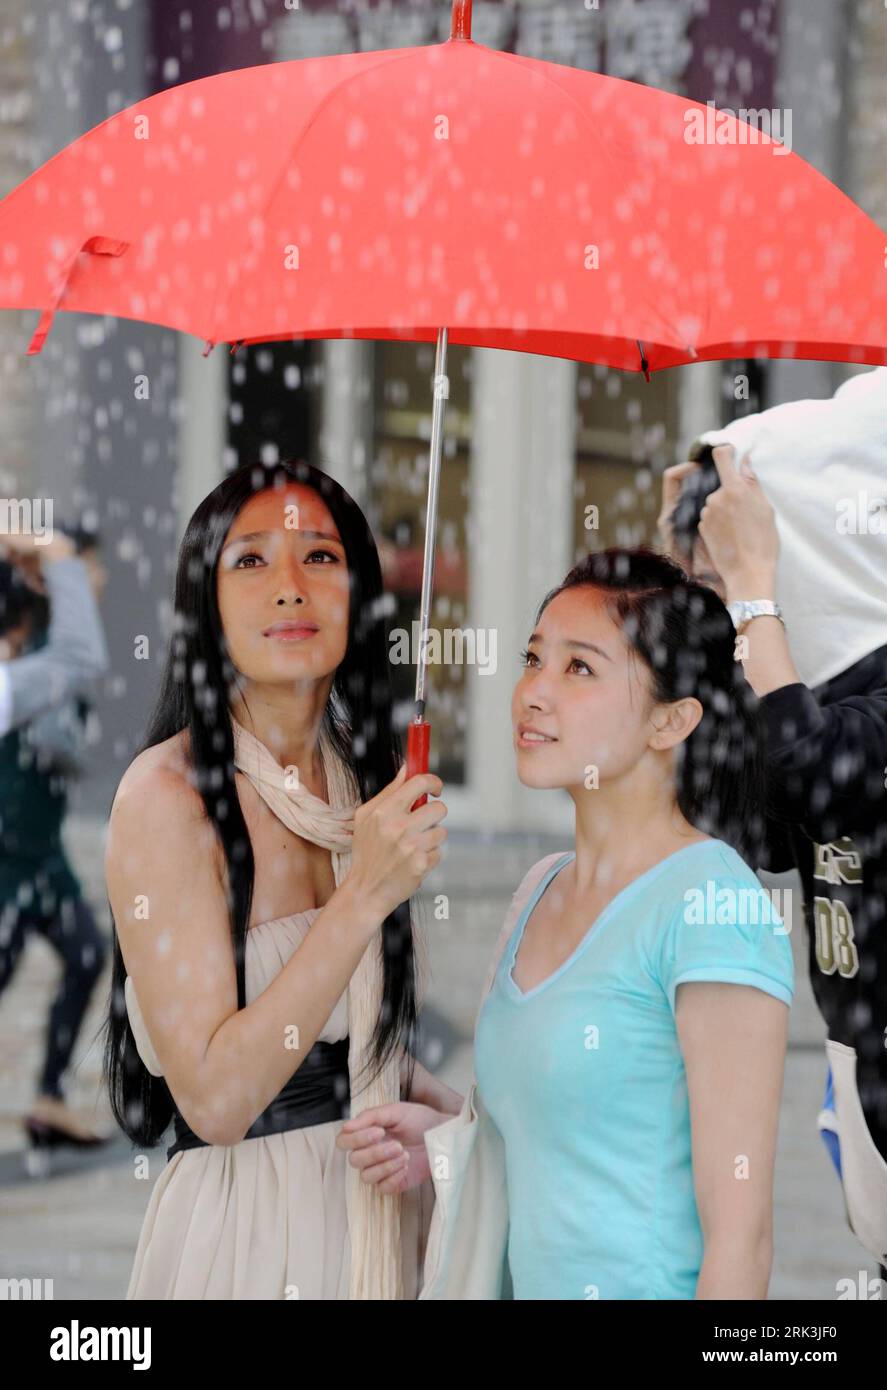 Bildnummer: 53522401  Datum: 10.10.2009  Copyright: imago/Xinhua (091010) -- BEIJING, Oct. 10, 2009 (Xinhua) -- Actress Qin Lan (L) acts as an angel during the filming of a charity advertisement in Beijing, capital of China, Oct. 10, 2009. Directed by Lu Chuan, the advertisement with the theme of Resisting AIDS will be shown to audience at the end of November. (Xinhua/Ji Guoqiang) (mcg) (1)CHINA-BEIJING-COMMONWEAL ADVERTISEMENT (CN) PUBLICATIONxNOTxINxCHN People Film kbdig xsk 2009 hoch o0 Regenschirm    Bildnummer 53522401 Date 10 10 2009 Copyright Imago XINHUA  Beijing OCT 10 2009 XINHUA act Stock Photo